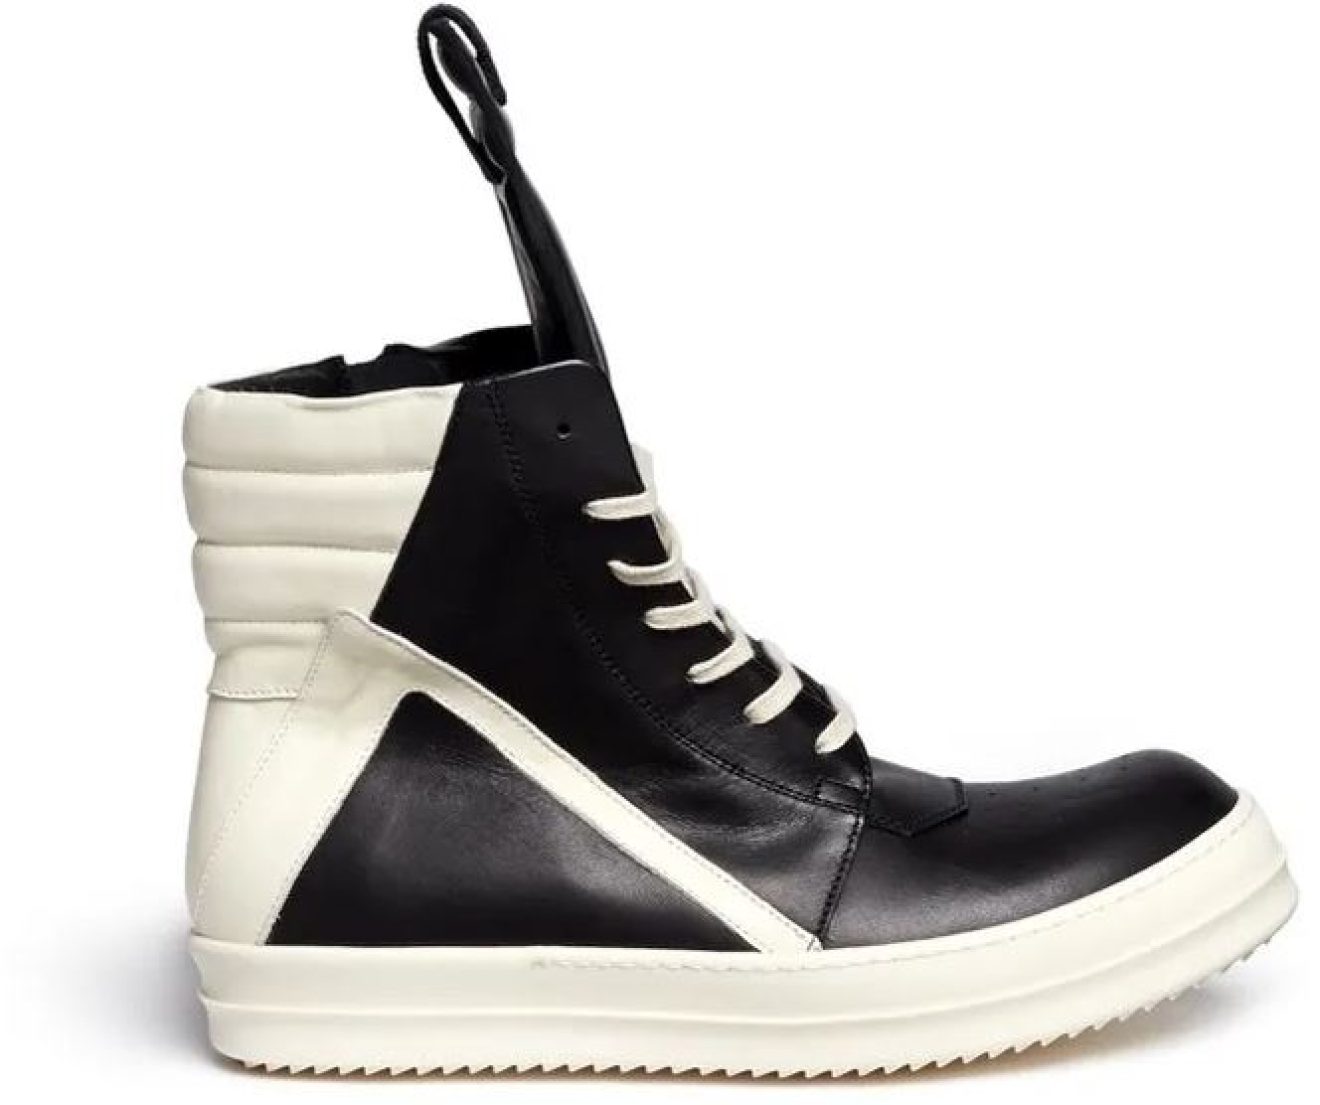 Rick Owens Shoe Size Chart How To Style Rick Owens? The Shoe Box NYC